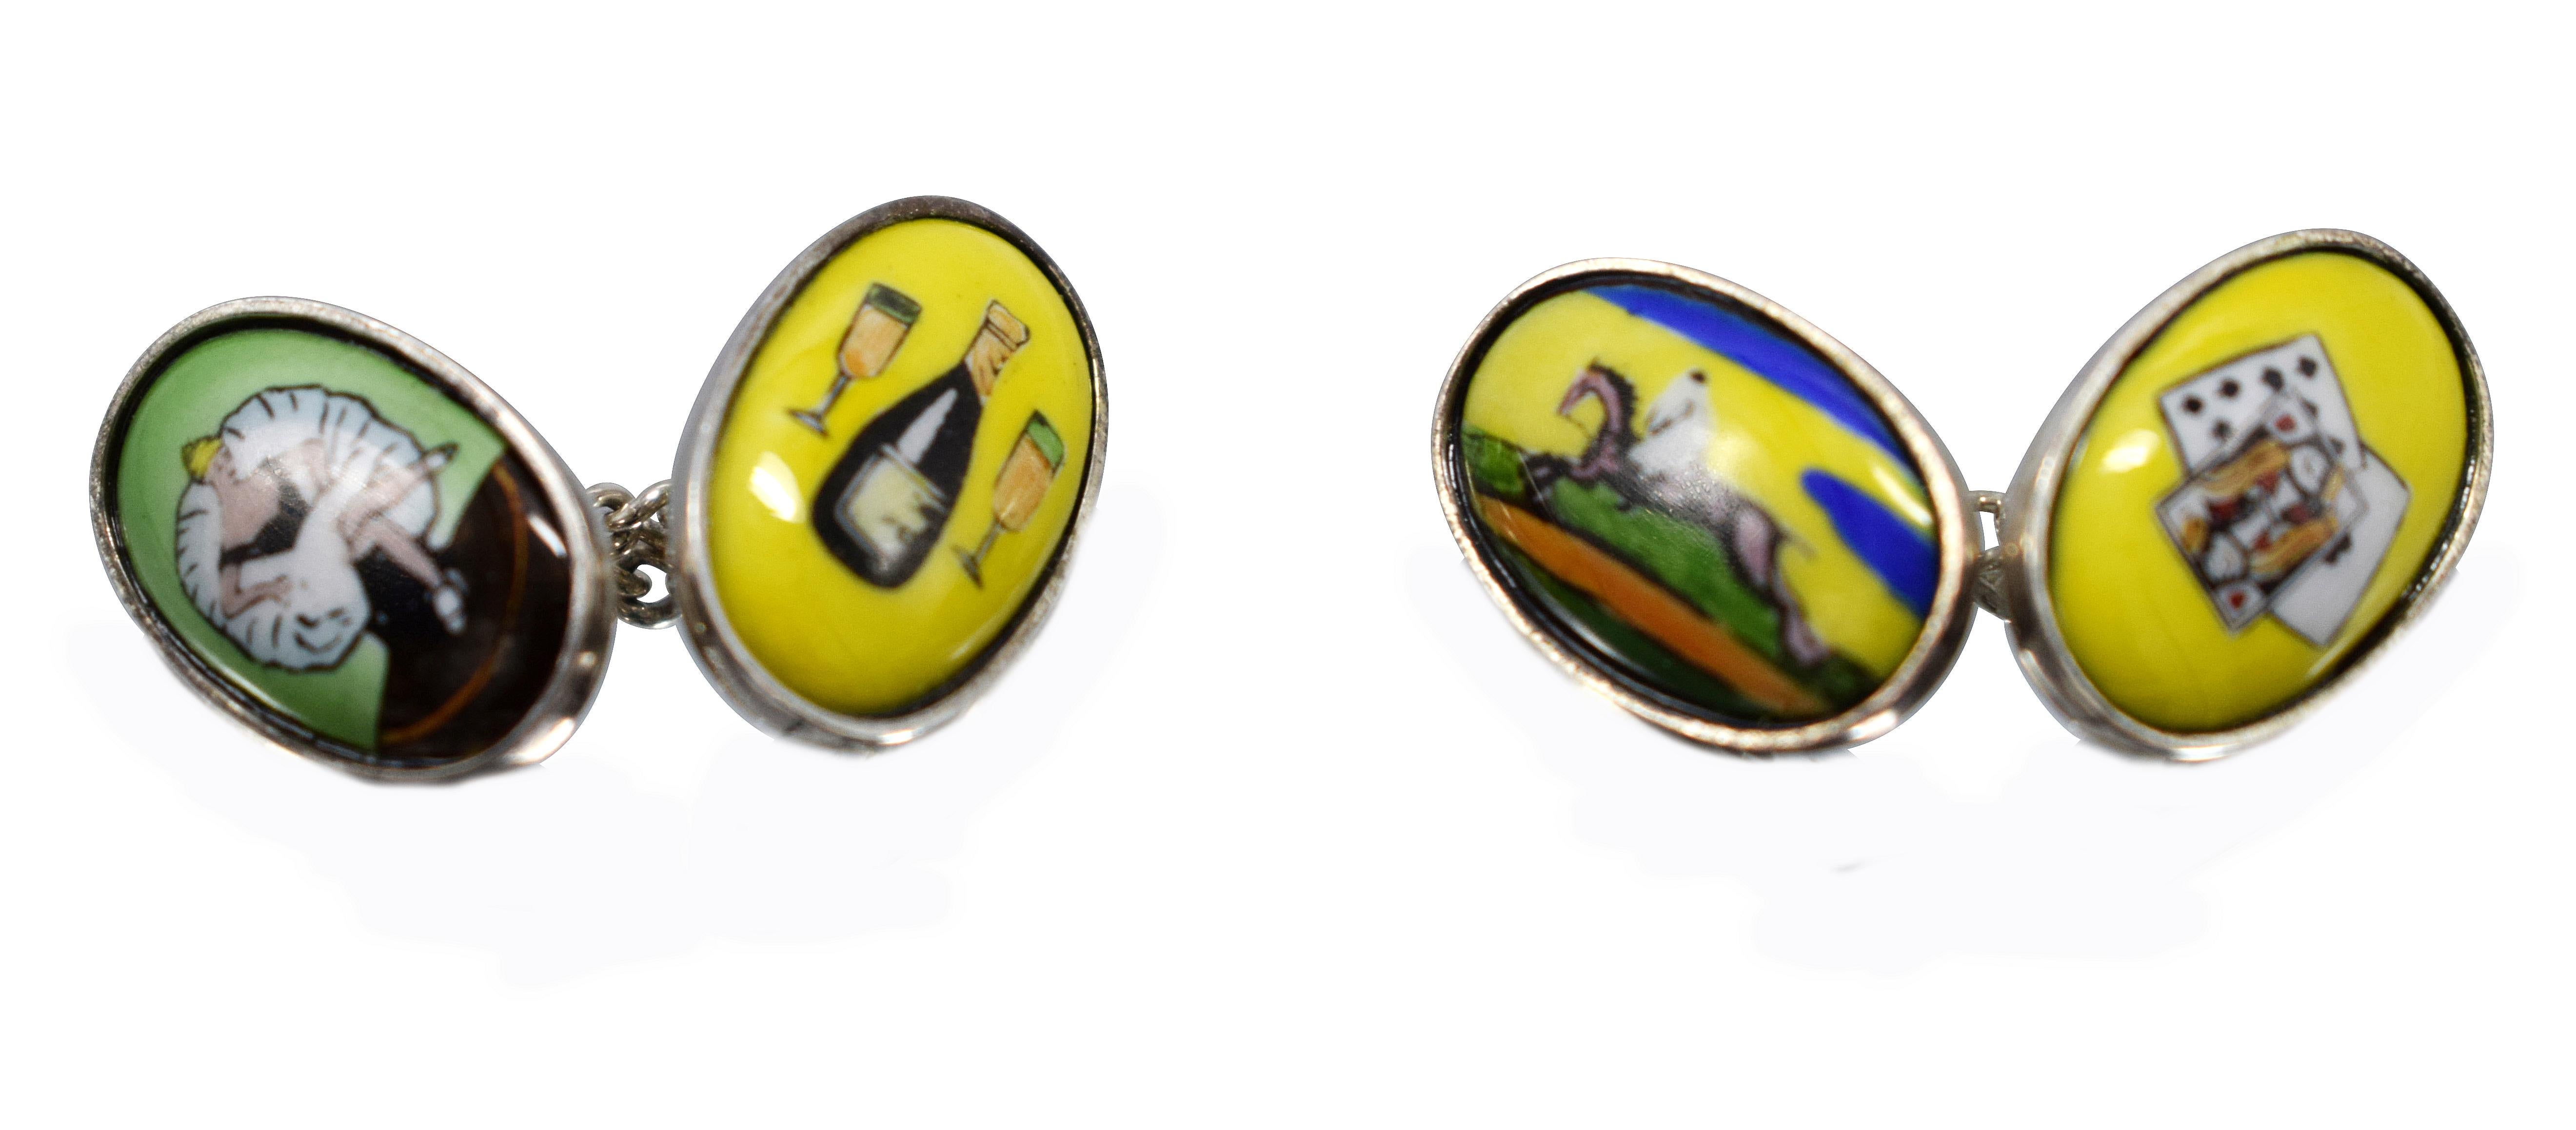 For your consideration are these very fine quality cufflinks by David Van Hagen which is a British brand that offers varied classic or contemporary accessories for the modern gentleman, these cufflinks are truly wonderful and unique. These quality